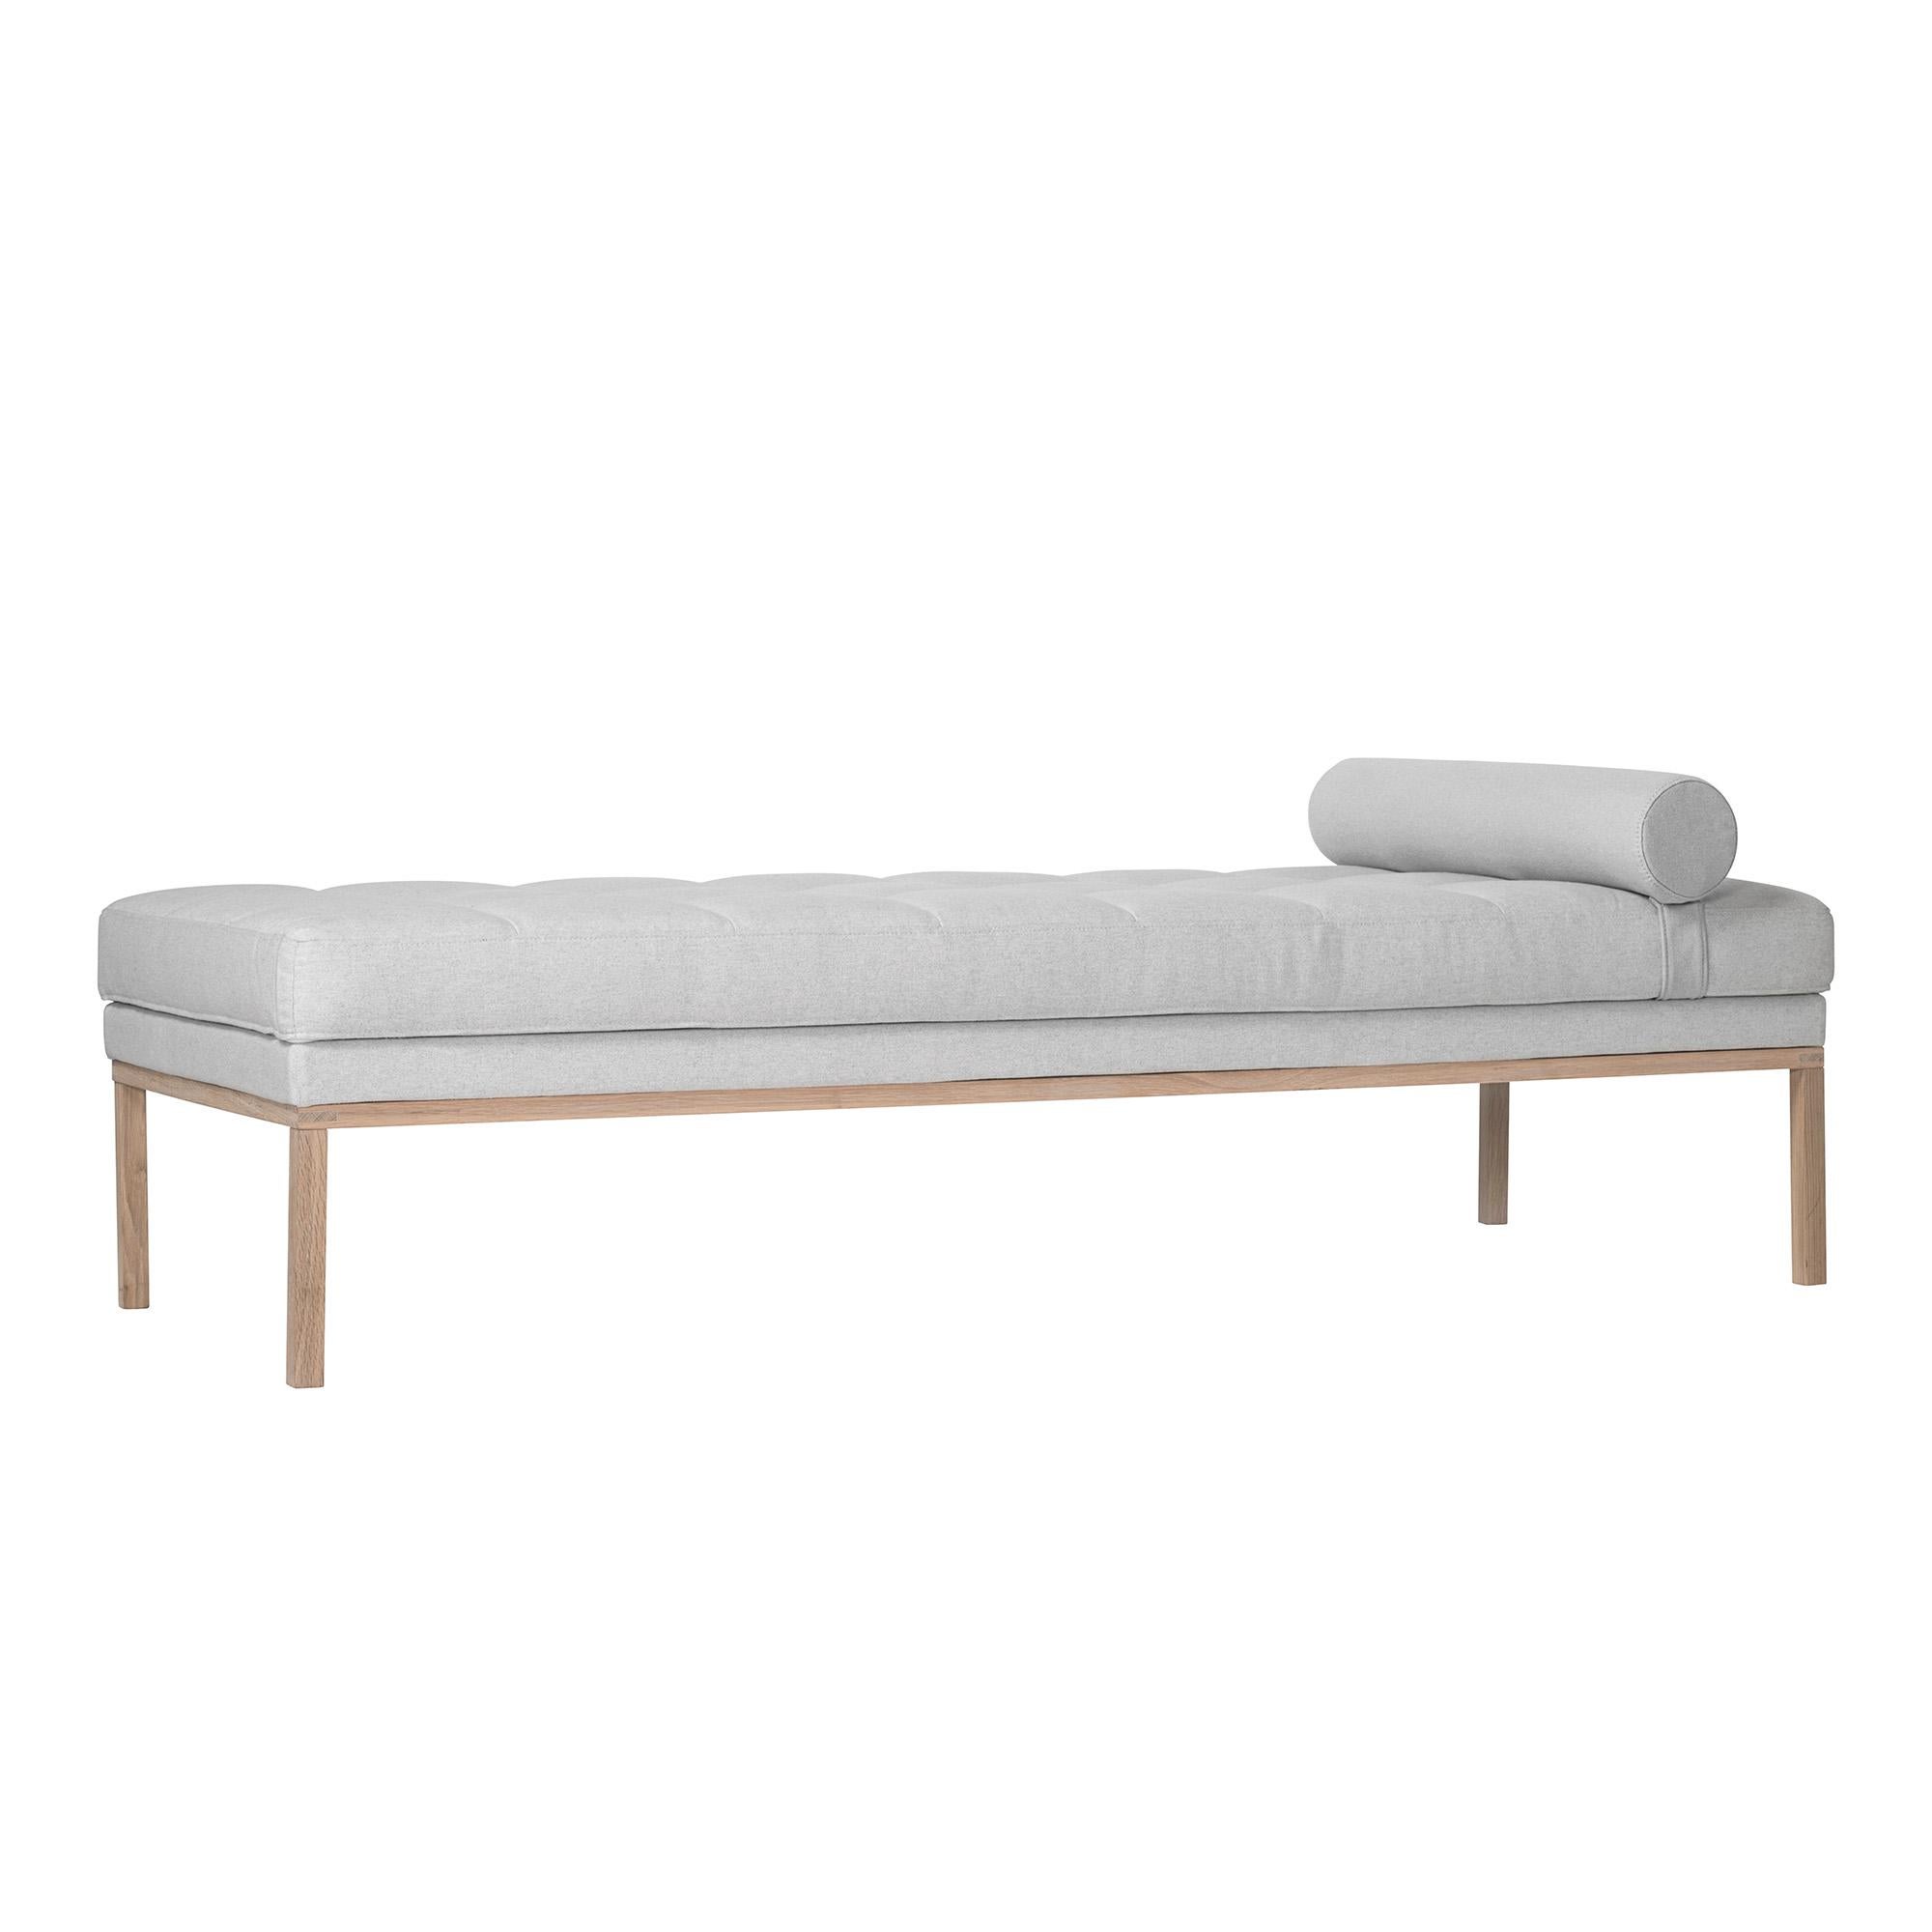 Clean and modern line design daybed with white oiled oak frame and bolster pillow. Also available in mustard yellow upholstery with smoked oak frame.